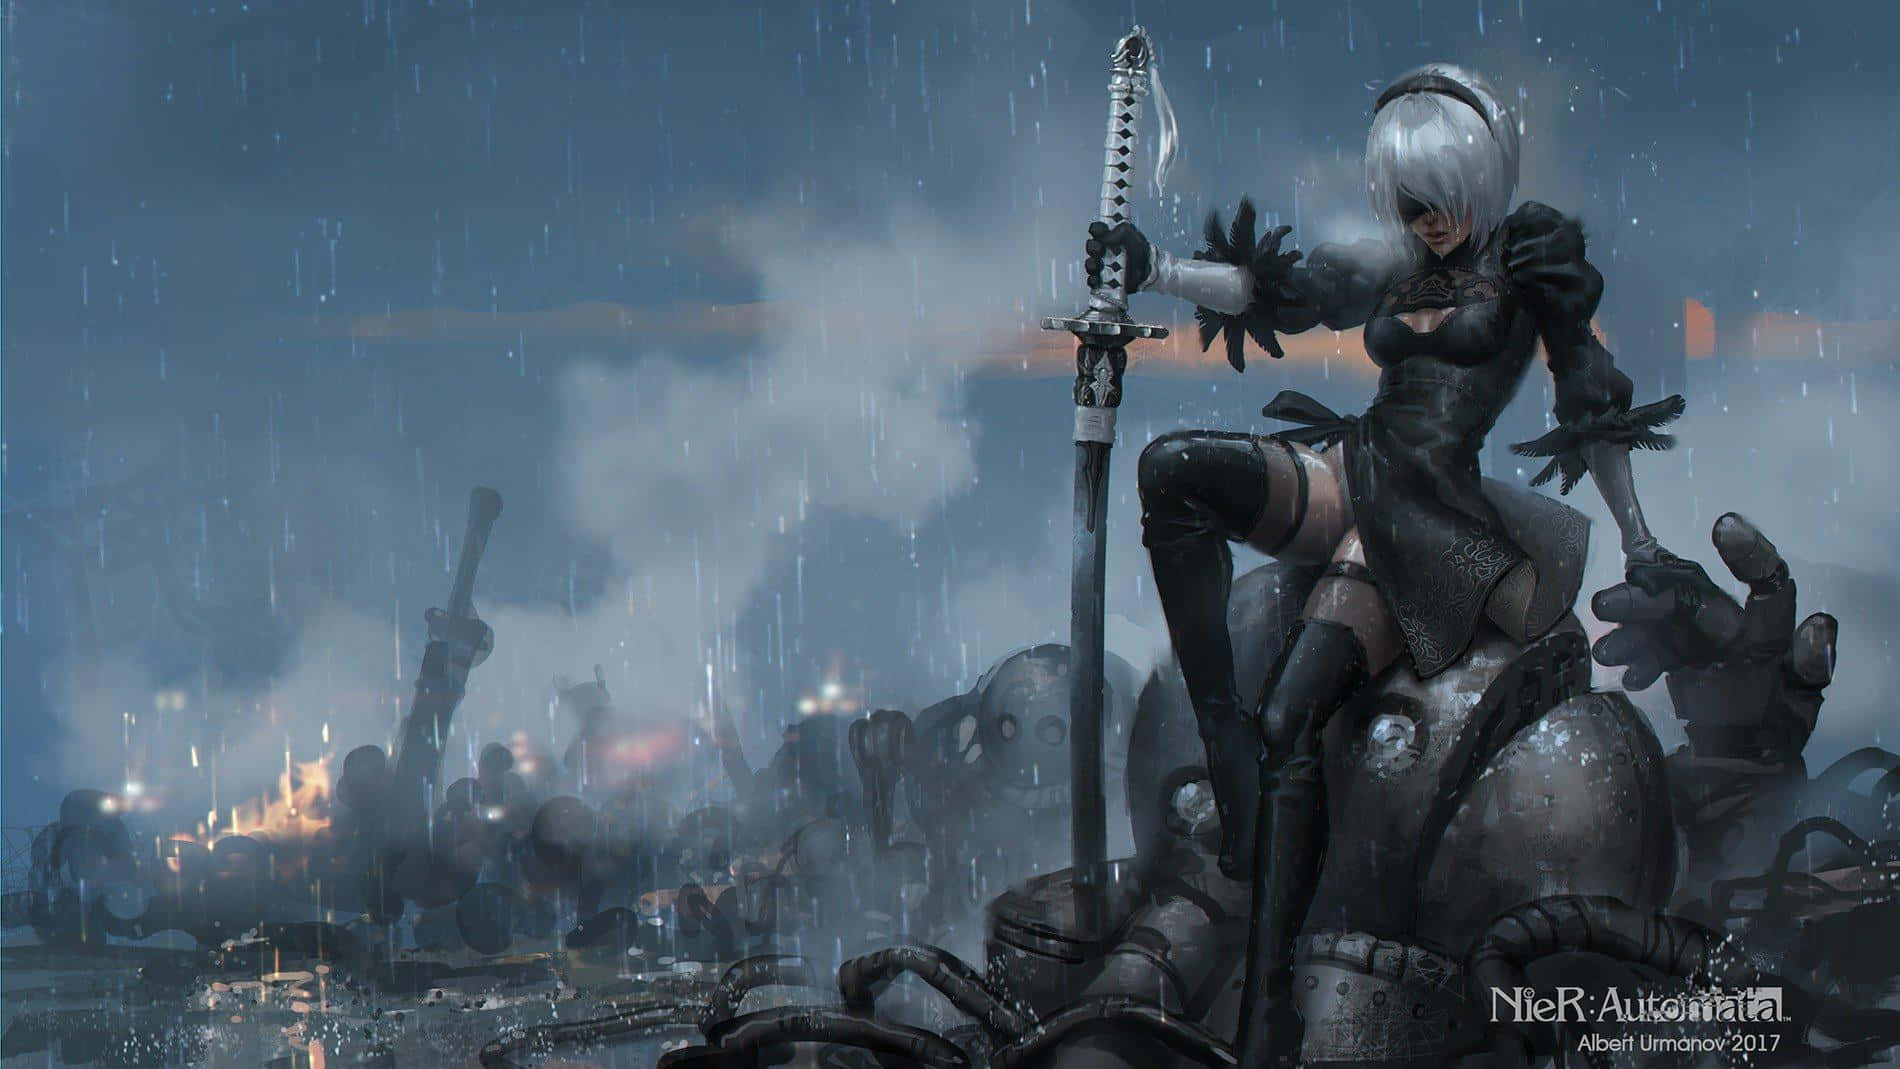 "2B - Ready for Action"